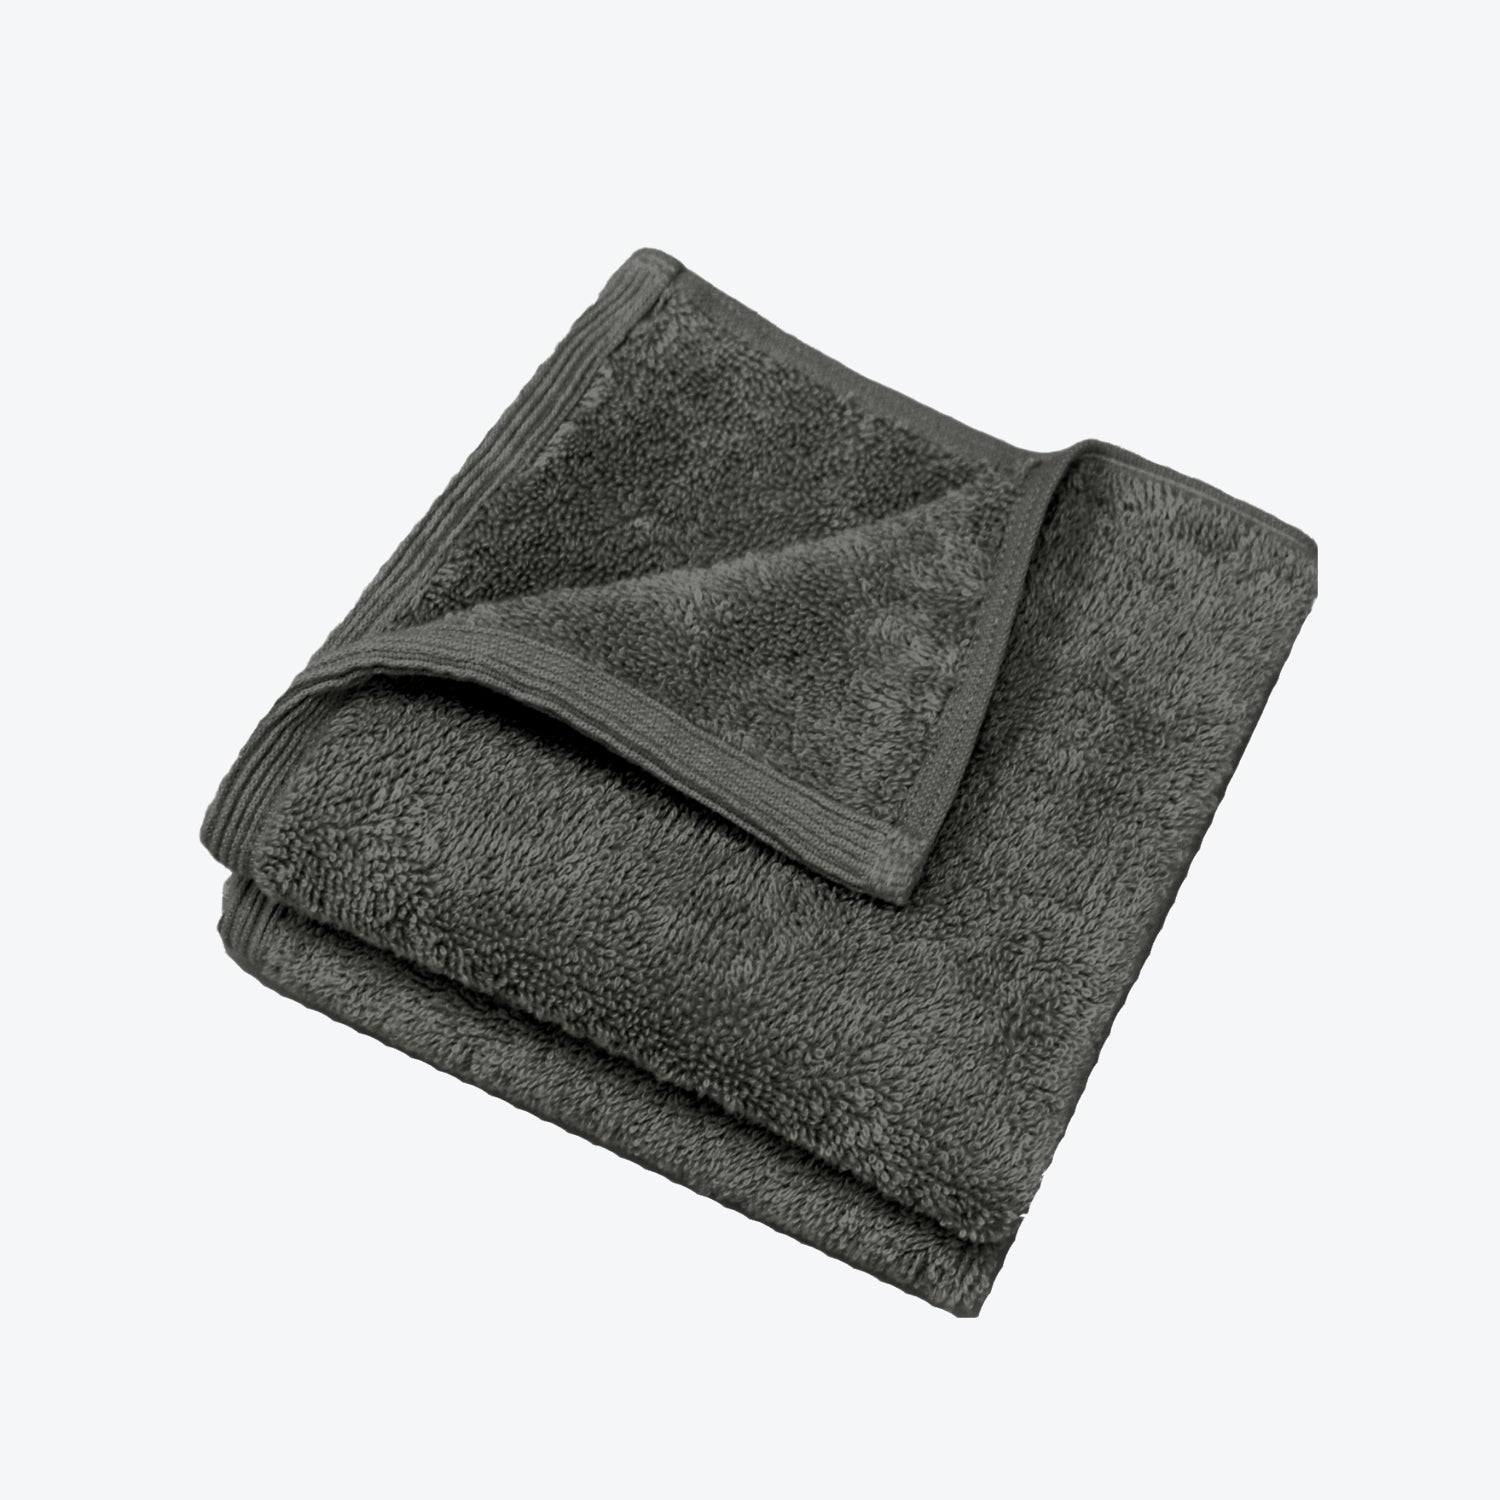 Charcoal bamboo face cloths